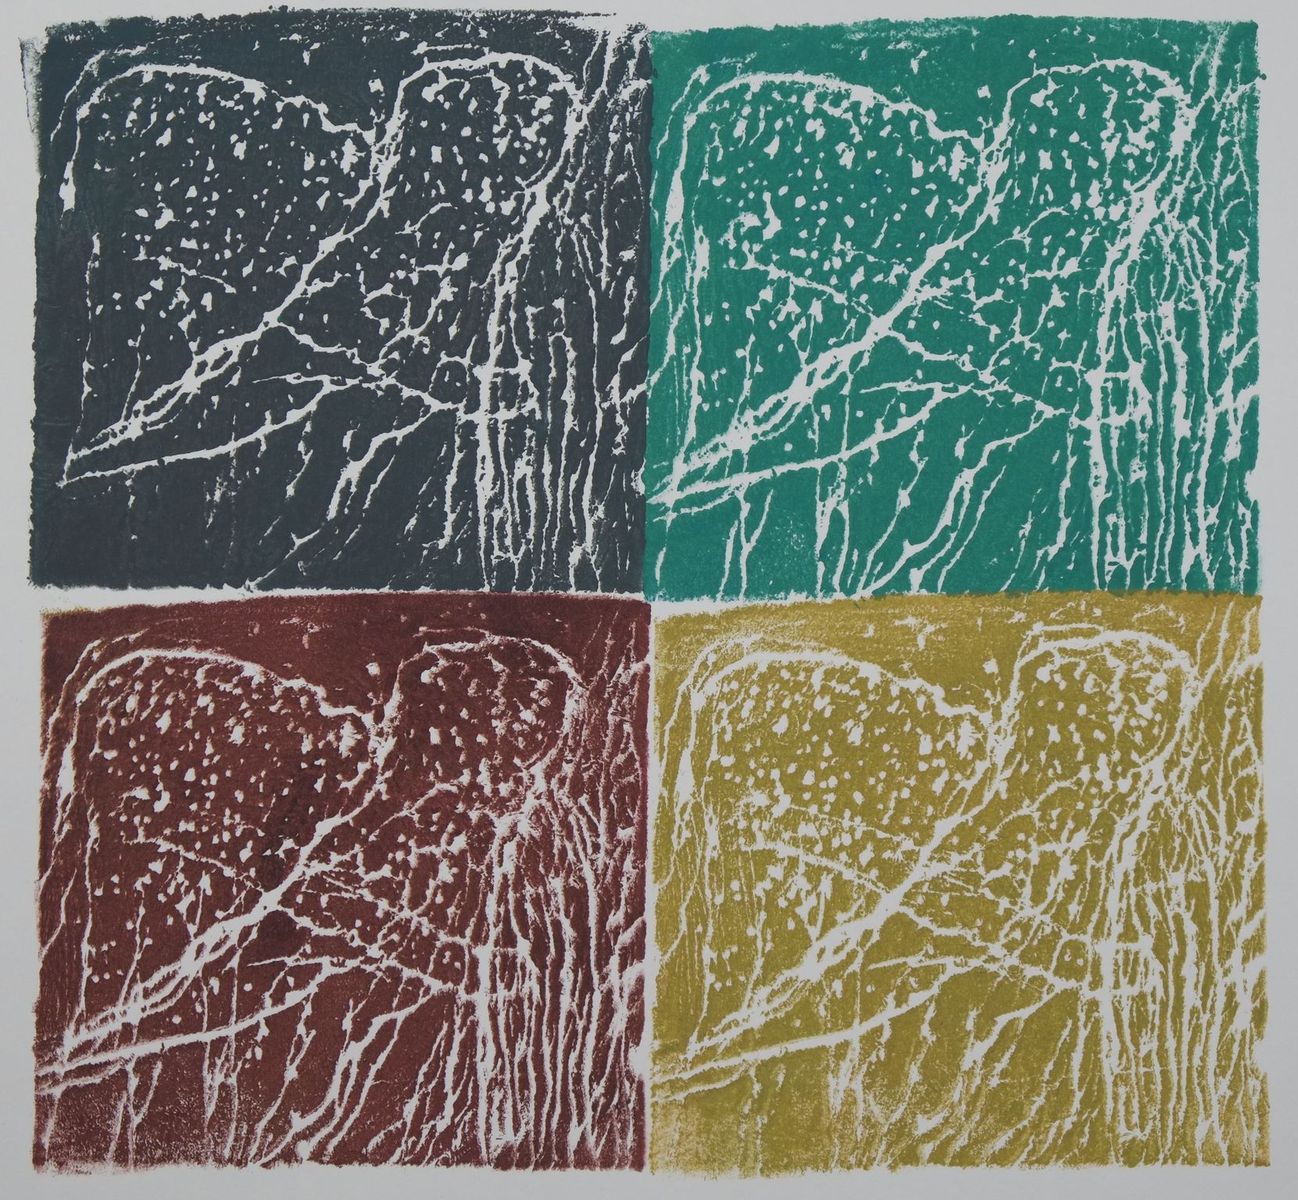 Ink on paper artwork depicting 4 large colored squares.  Dark blue top left, maroon in bottom left, teal in top right, golden yellow in bottom right with white paint drizzled over all